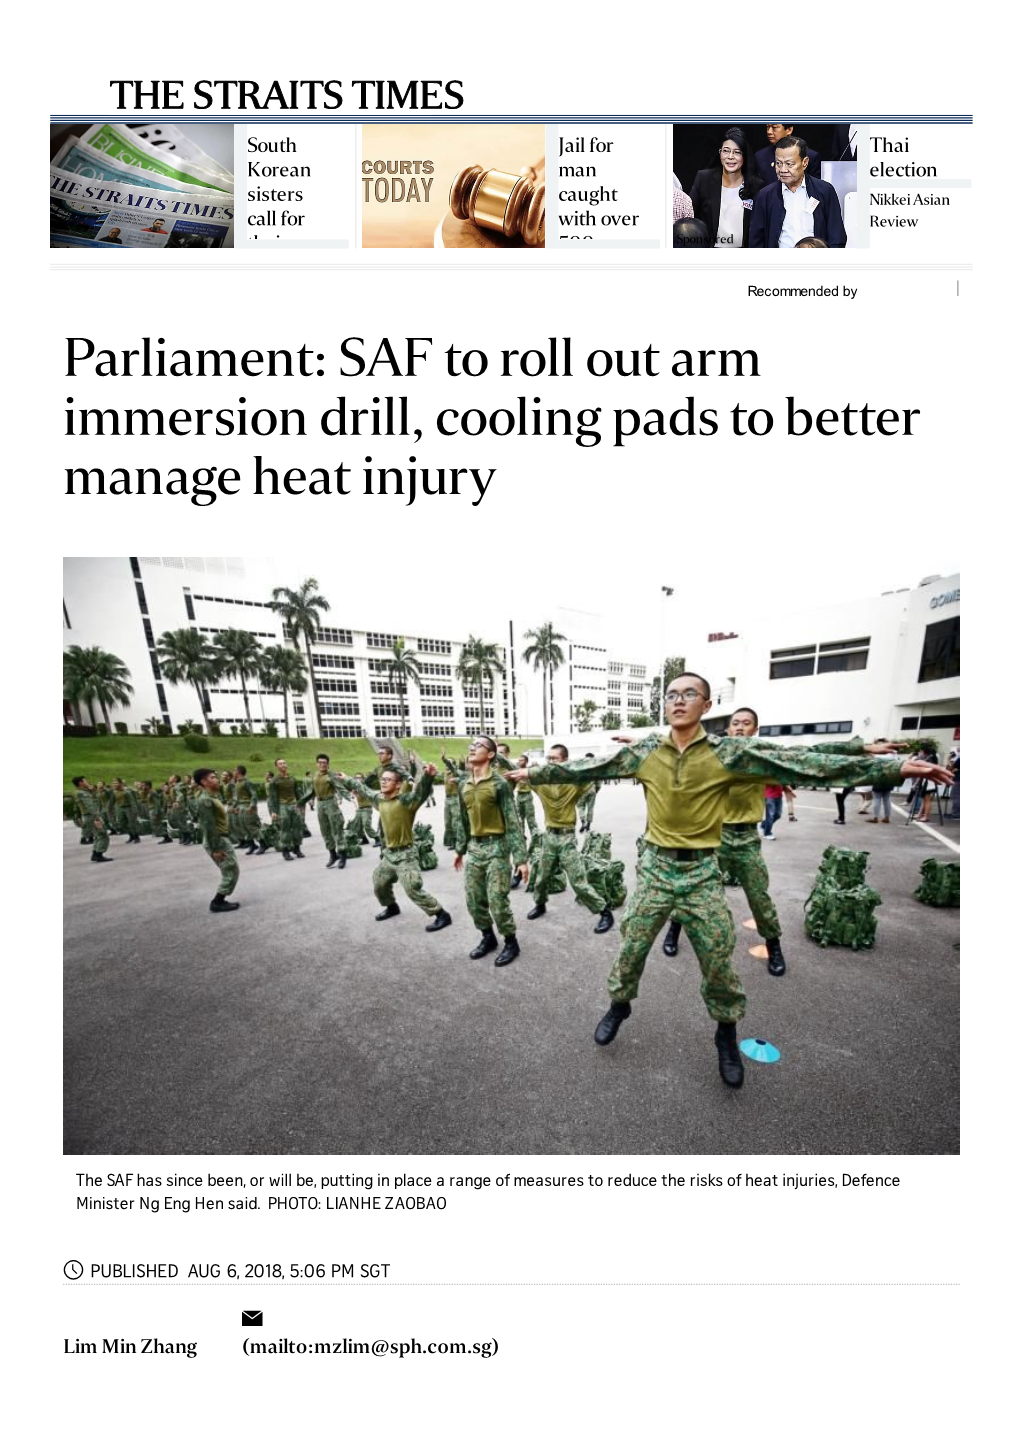 SAF to Roll out Arm Immersion Drill, Cooling Pads to Better Manage Heat Injury